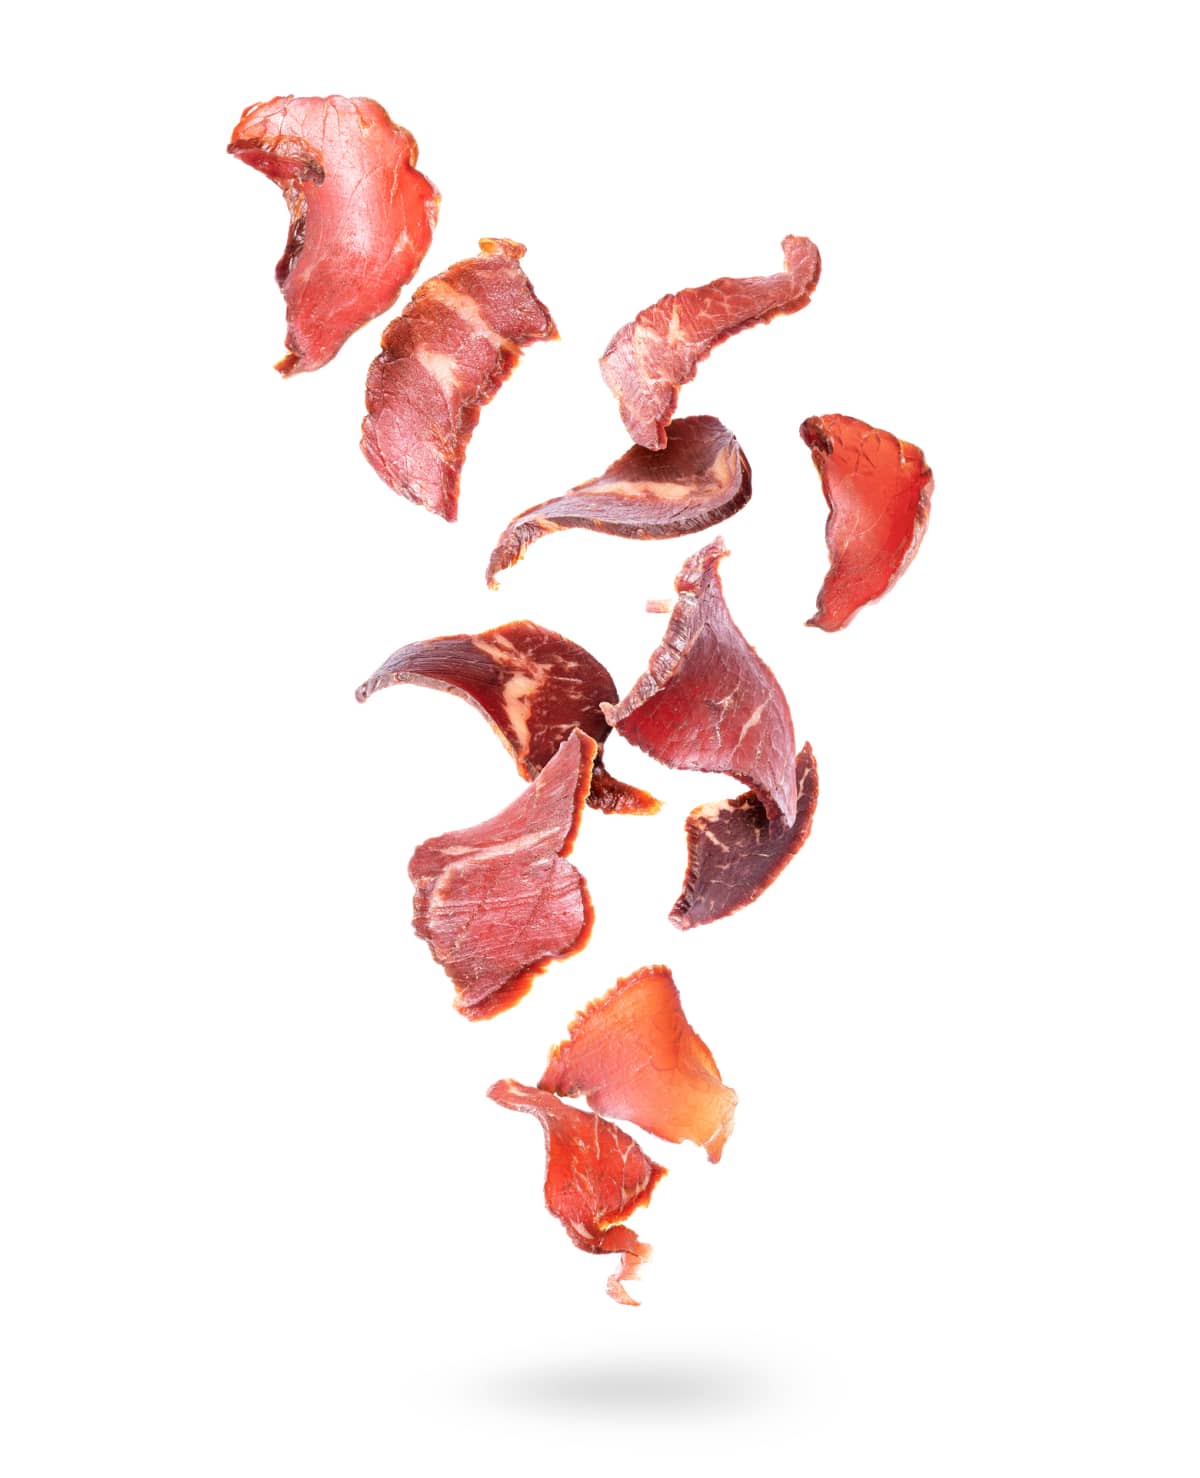 Beef jerky pieces in the air on a white background